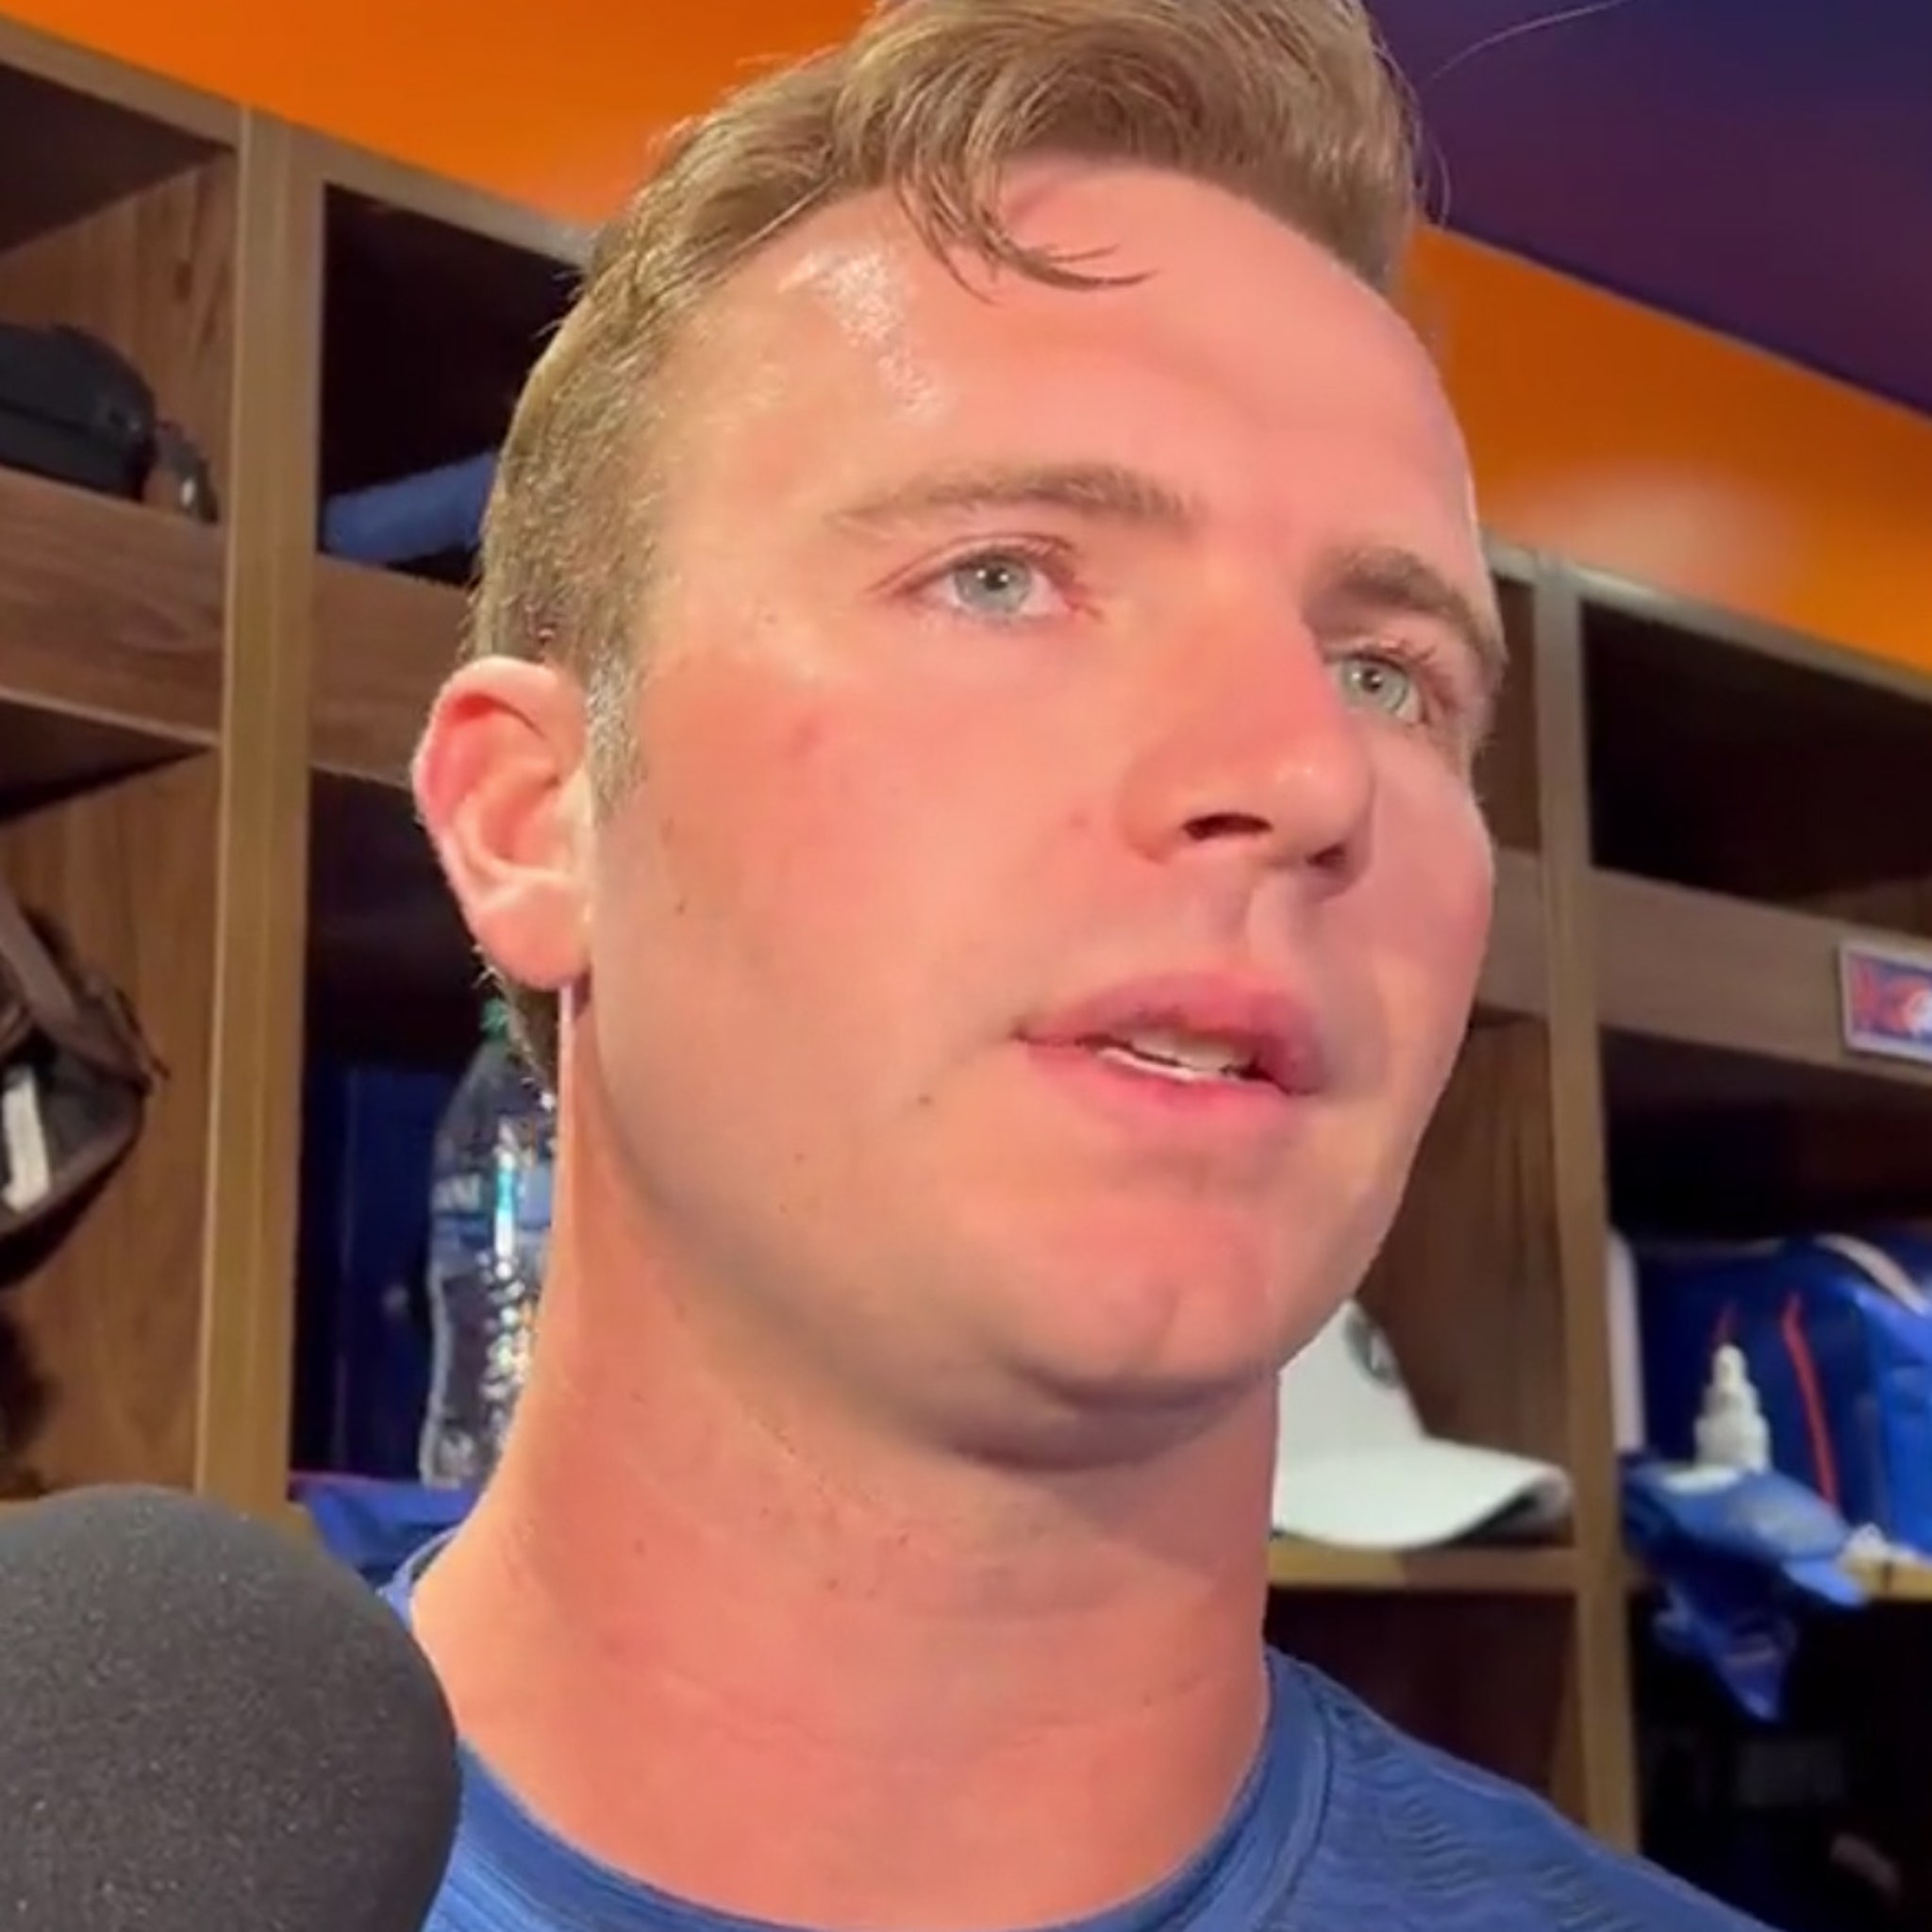 Pete Alonso: Mets star says he is thankful to be alive following rollover  accident